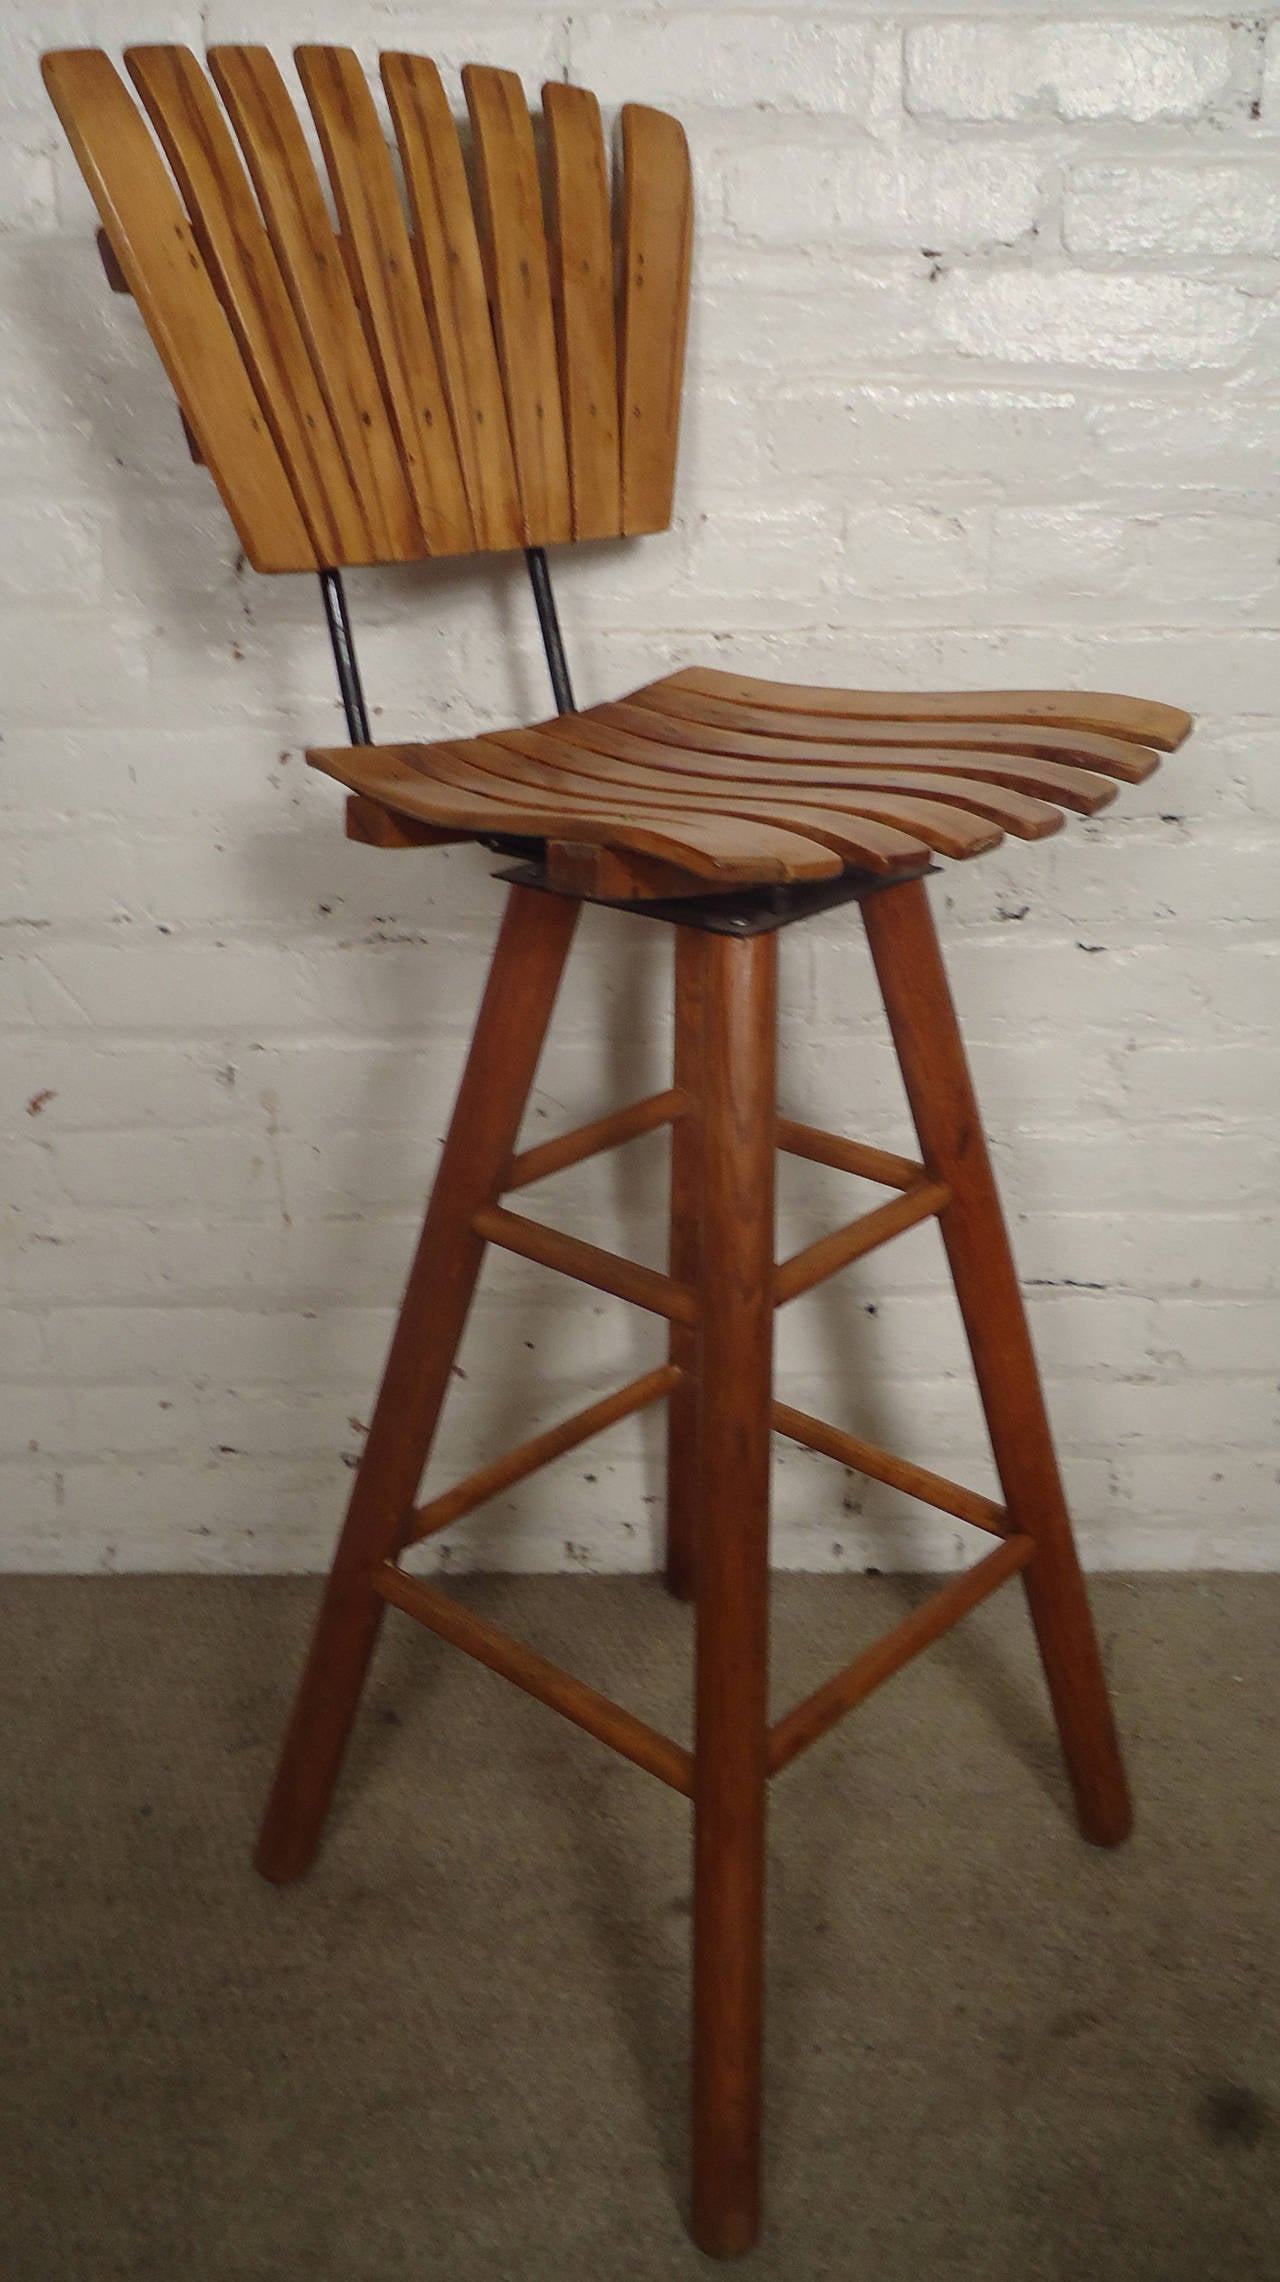 Arthur Umanoff style slat stools, tall and comfortable design perfect for kitchen or bar use. Swivel seats with bent slats on an iron frame.
Multiple available. Listing is for one.

(Please confirm item location - NY or NJ - with dealer)